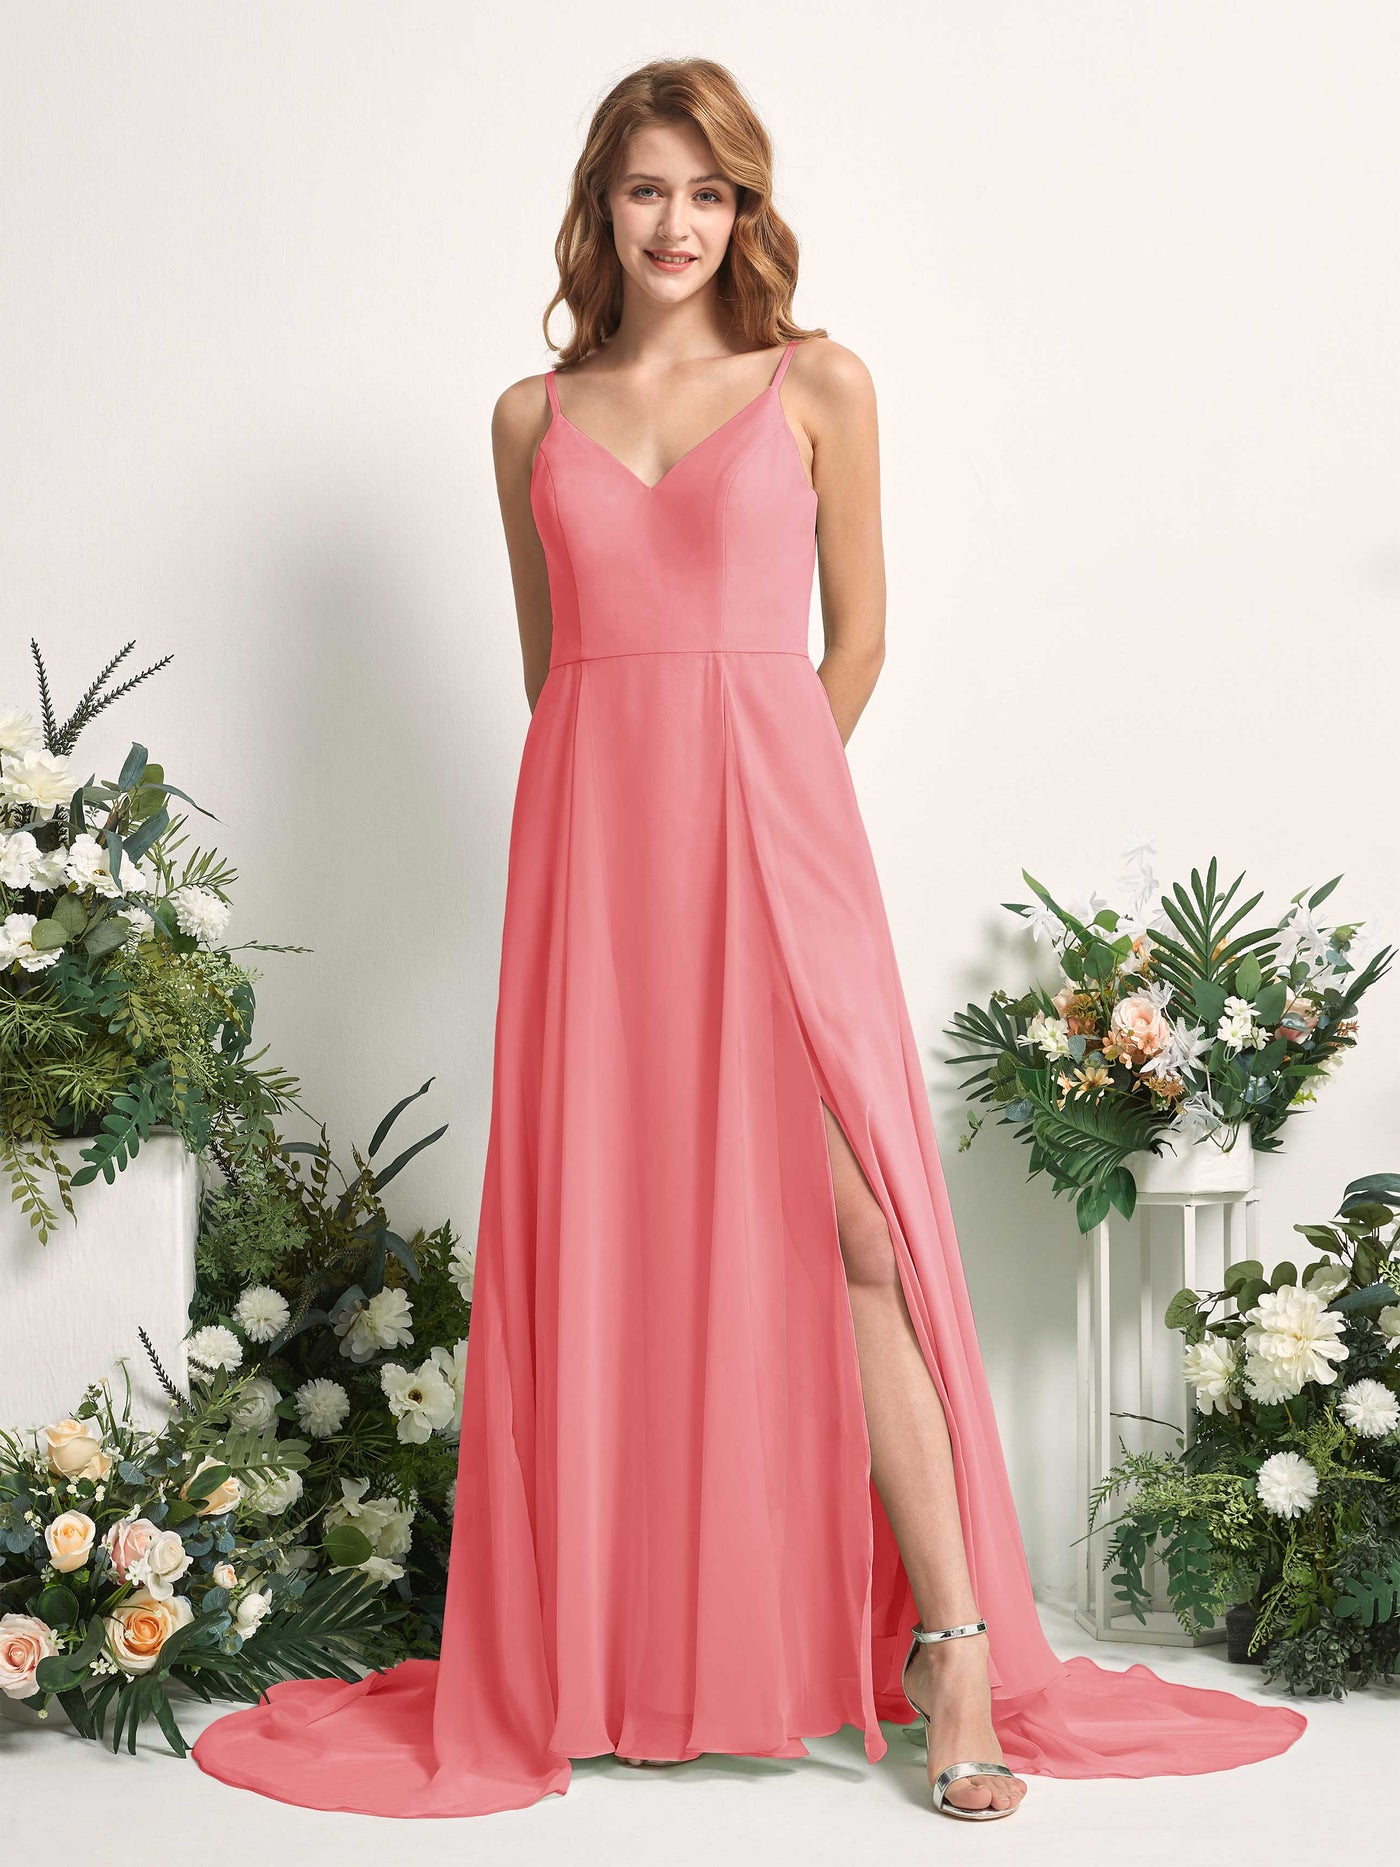 Bridesmaid Dress A-line Chiffon Spaghetti-straps Full Length Sleeveless Wedding Party Dress - Coral Pink (81227730)#color_coral-pink